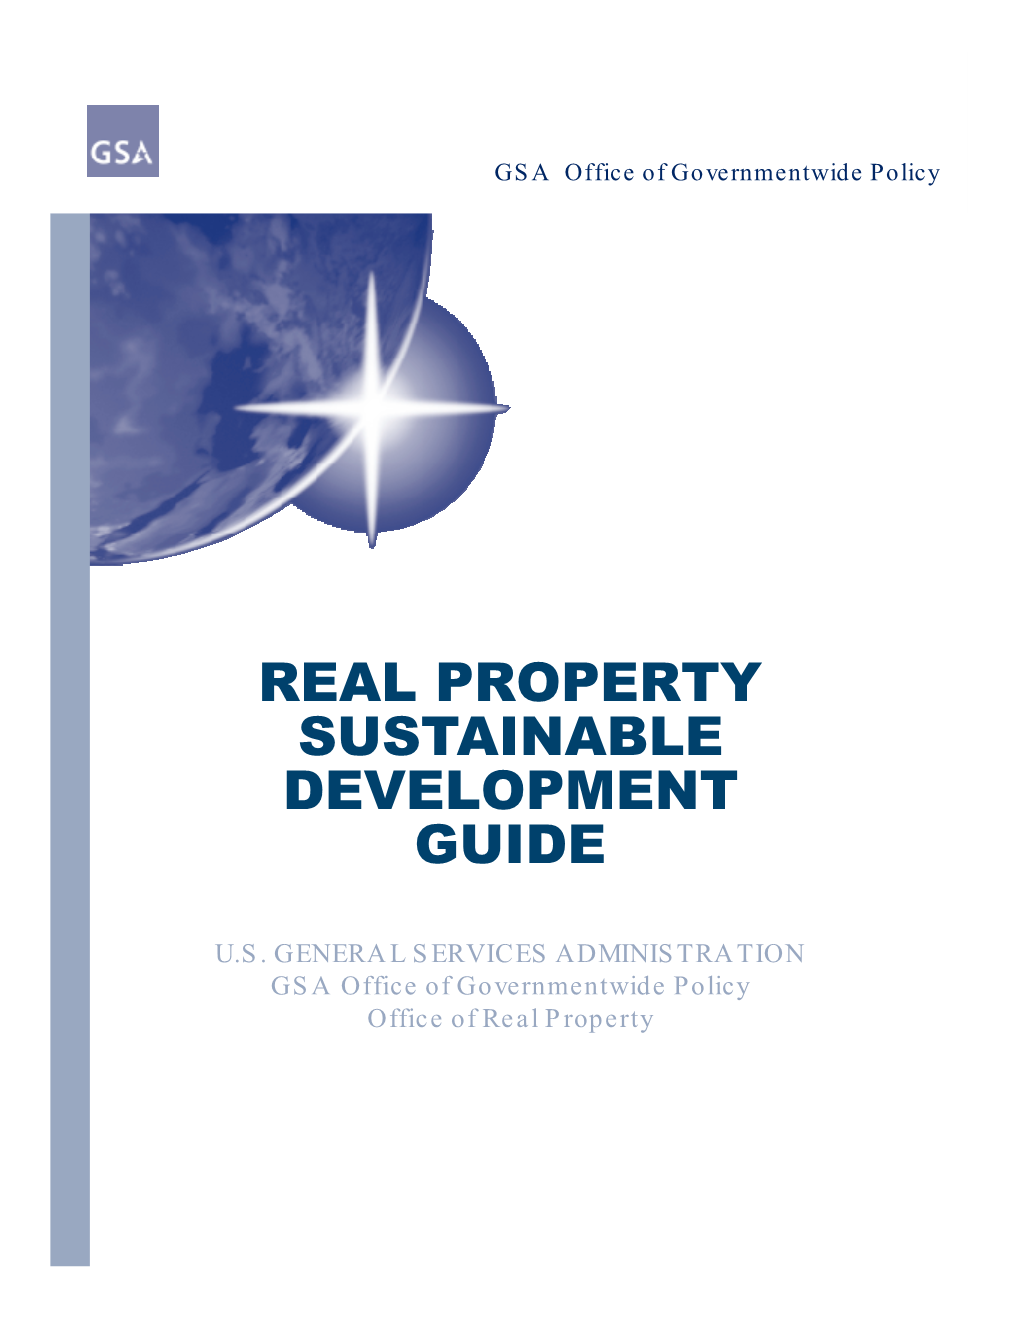 Real Property Sustainable Development Guide